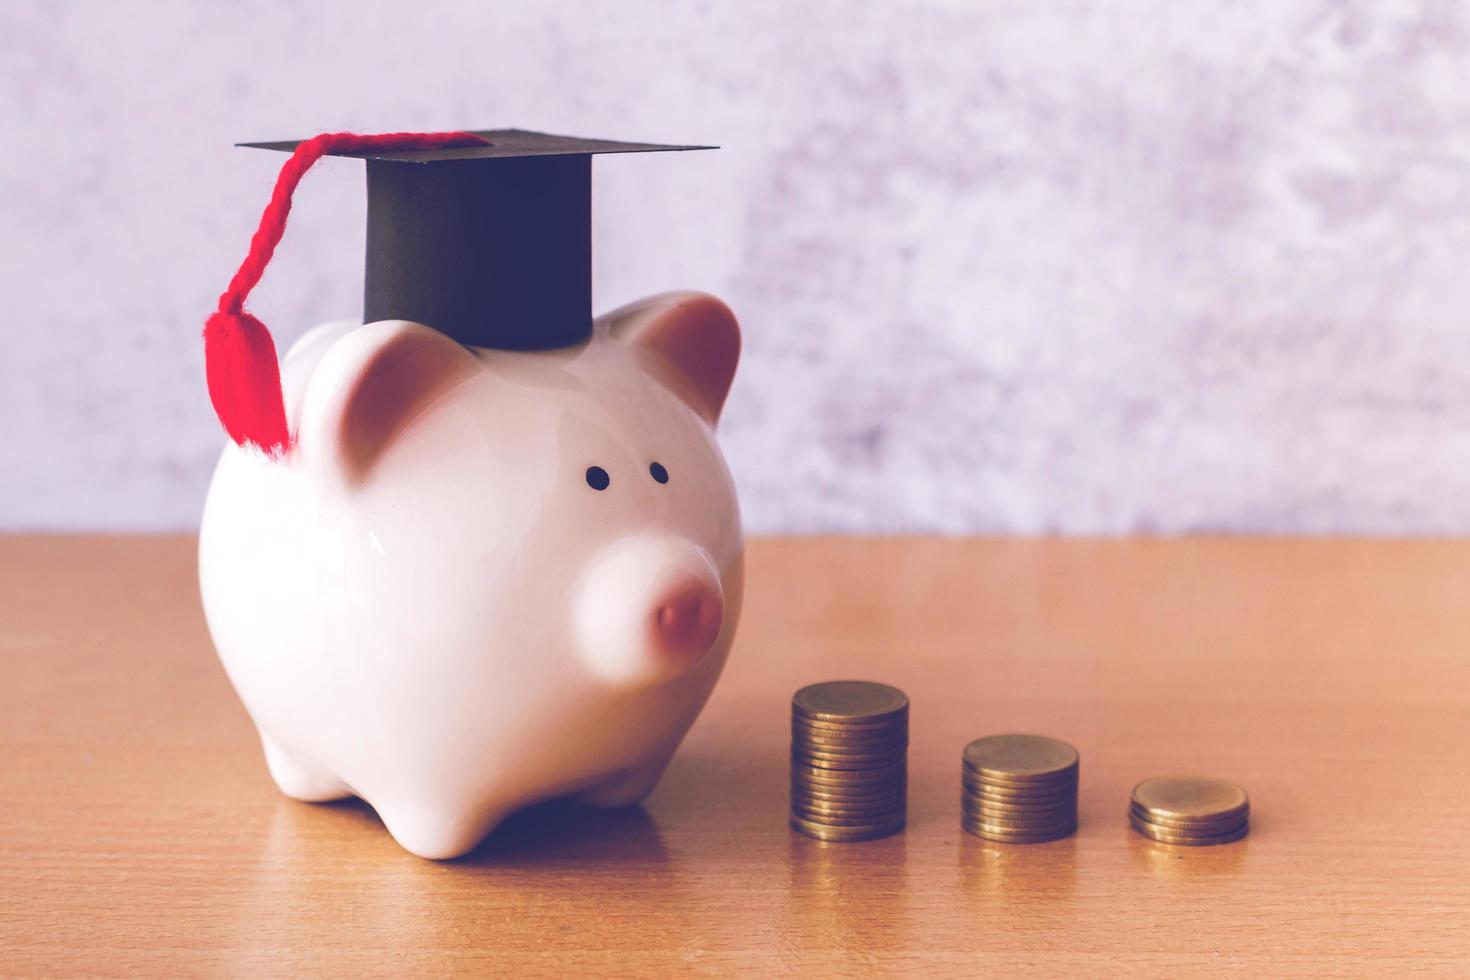 Graduation hat on piggy bank with stack of coins money on table, saving money for education concept photo